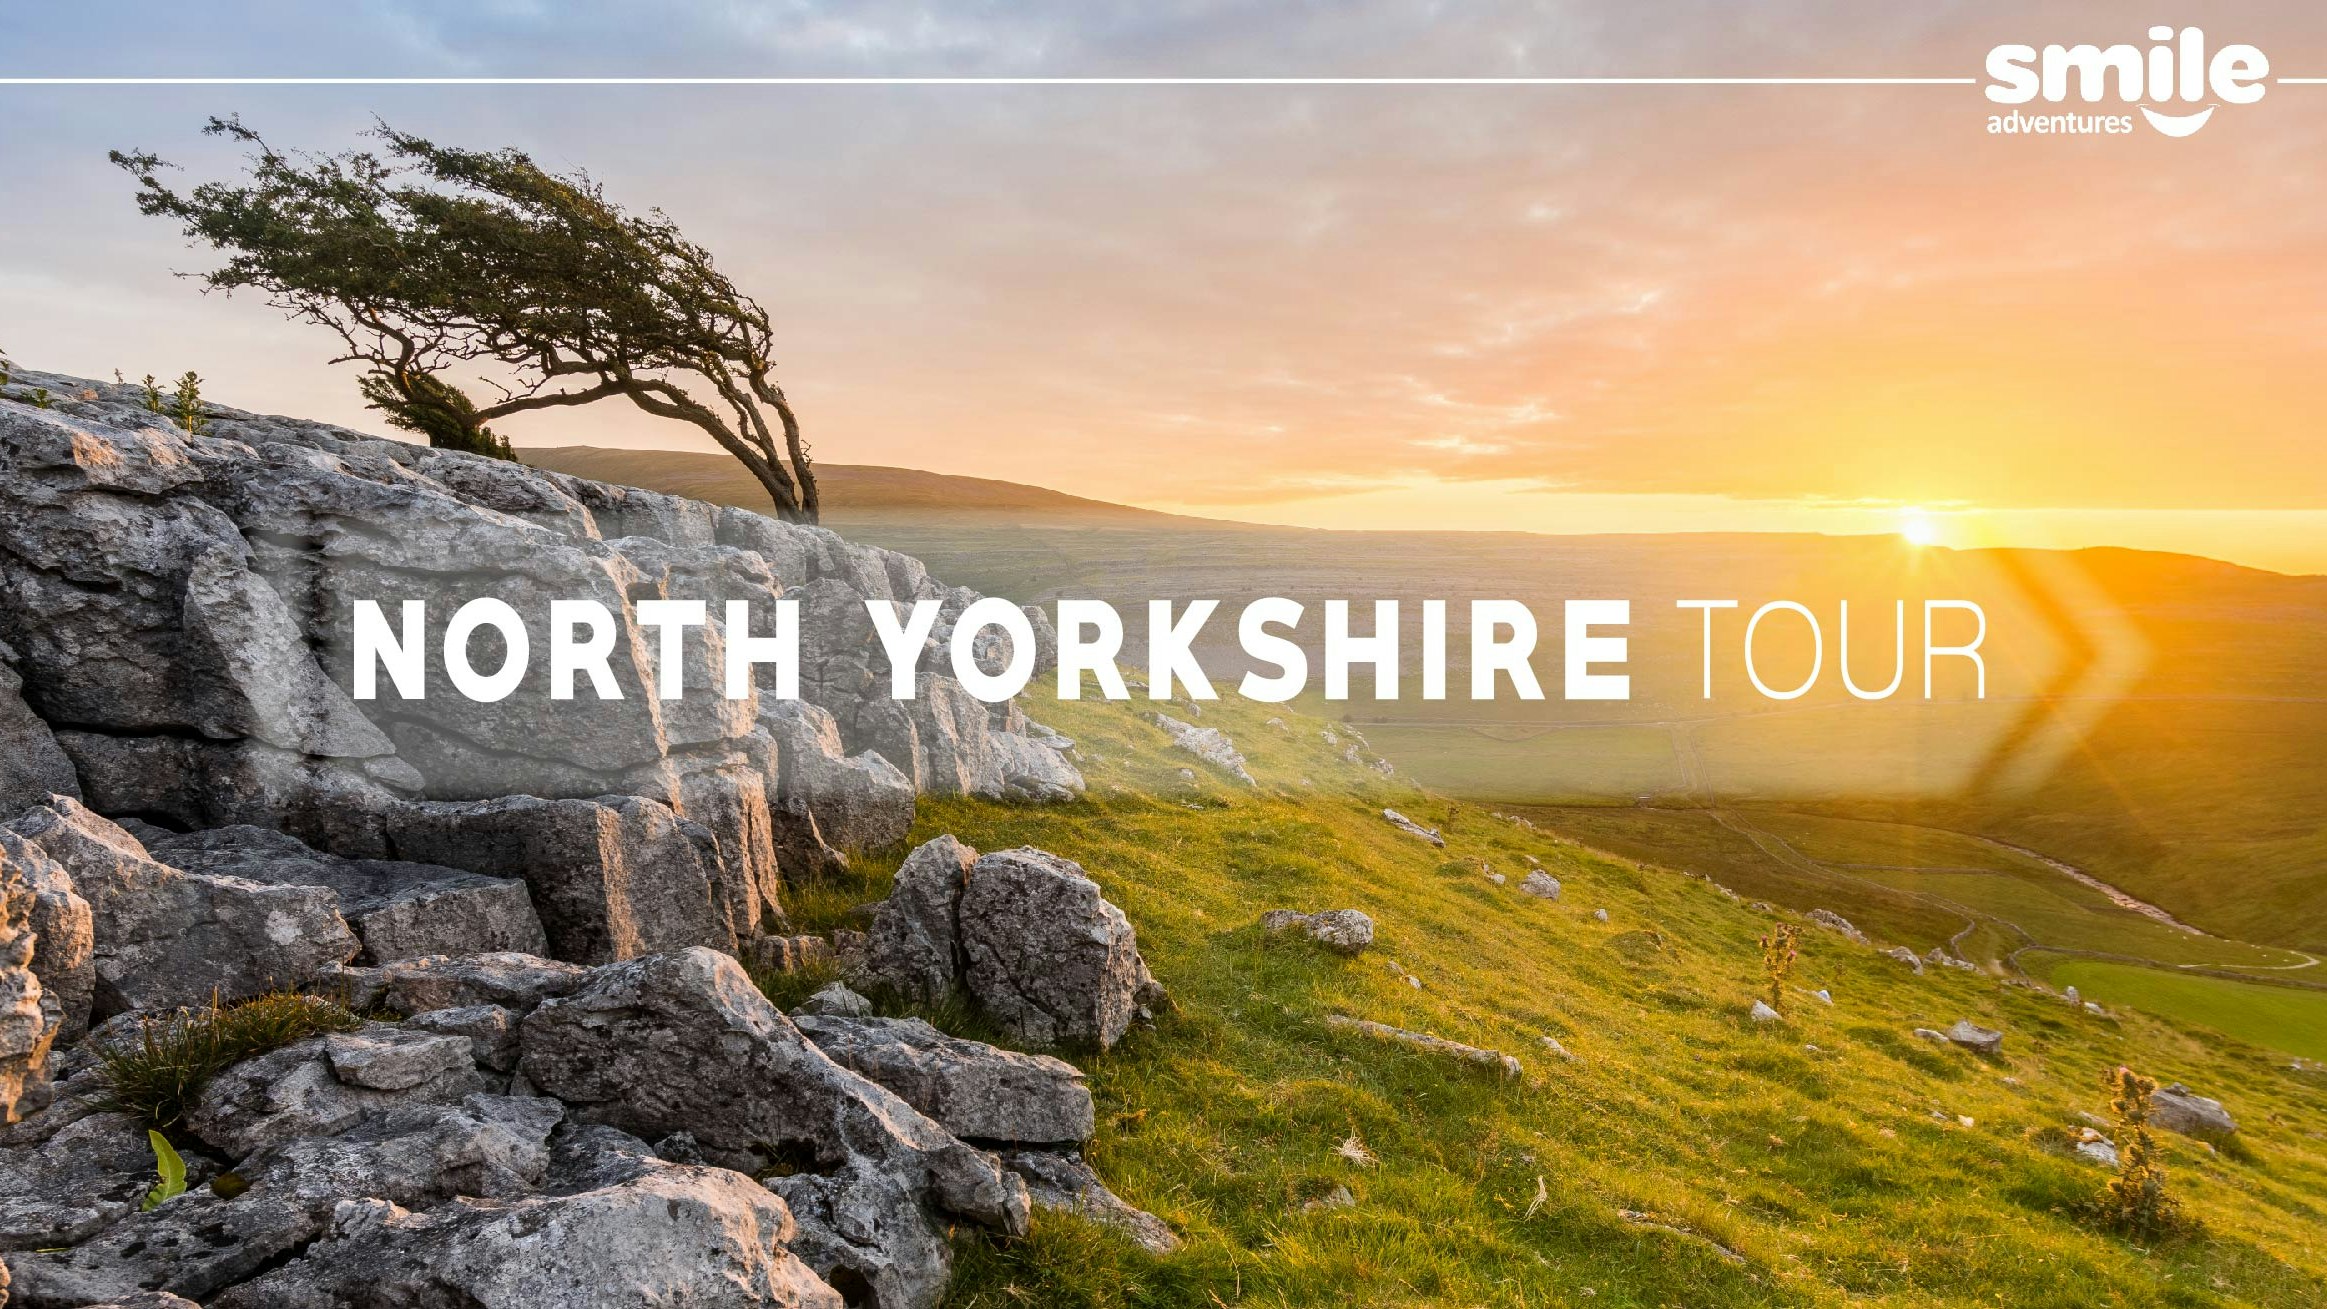 North Yorkshire Tour – From Manchester